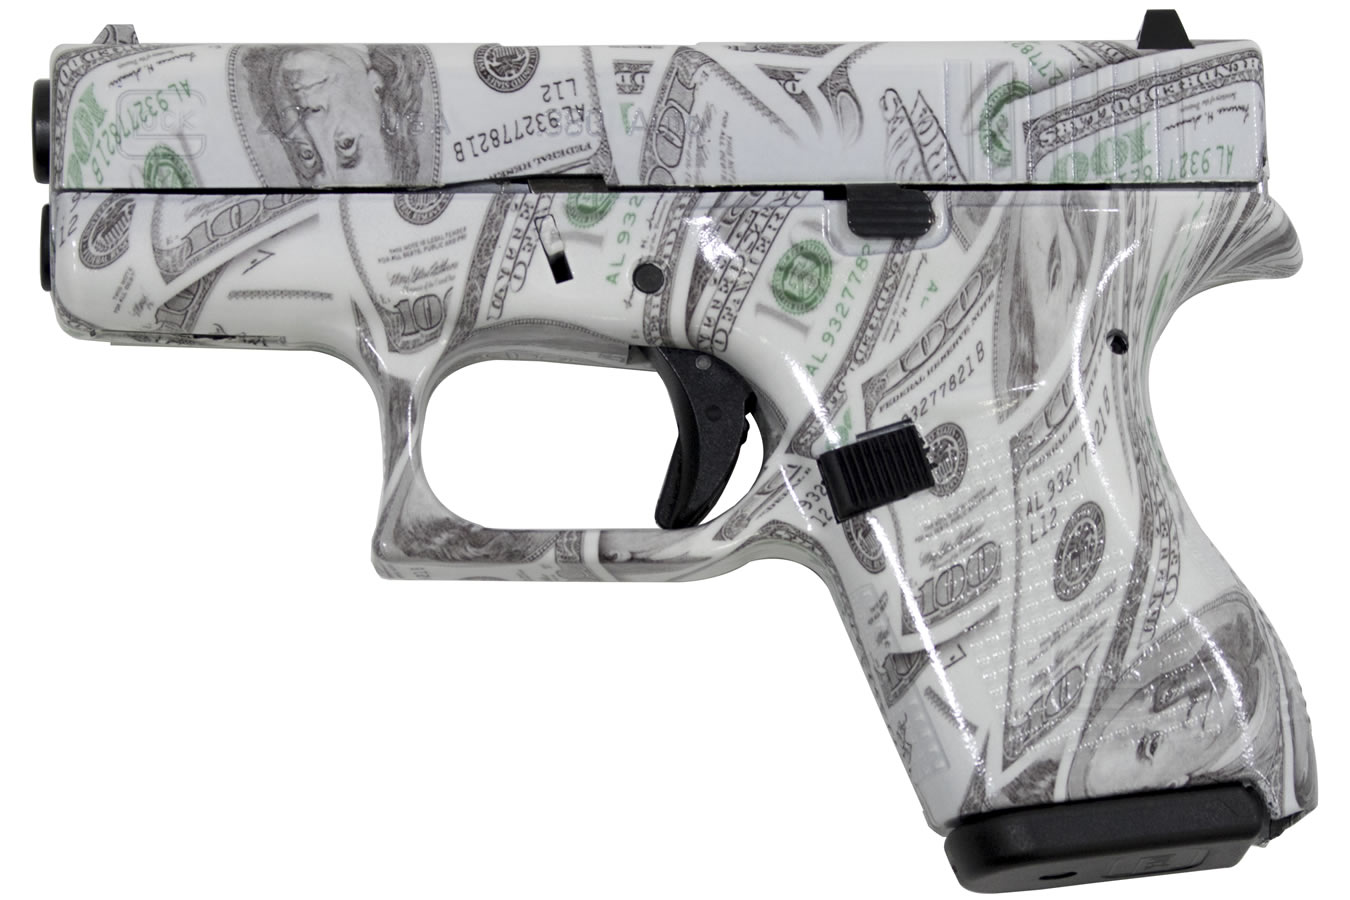 Glock 42 380 ACP Carry Conceal Pistol with Glow-in-the-Dark Hundred